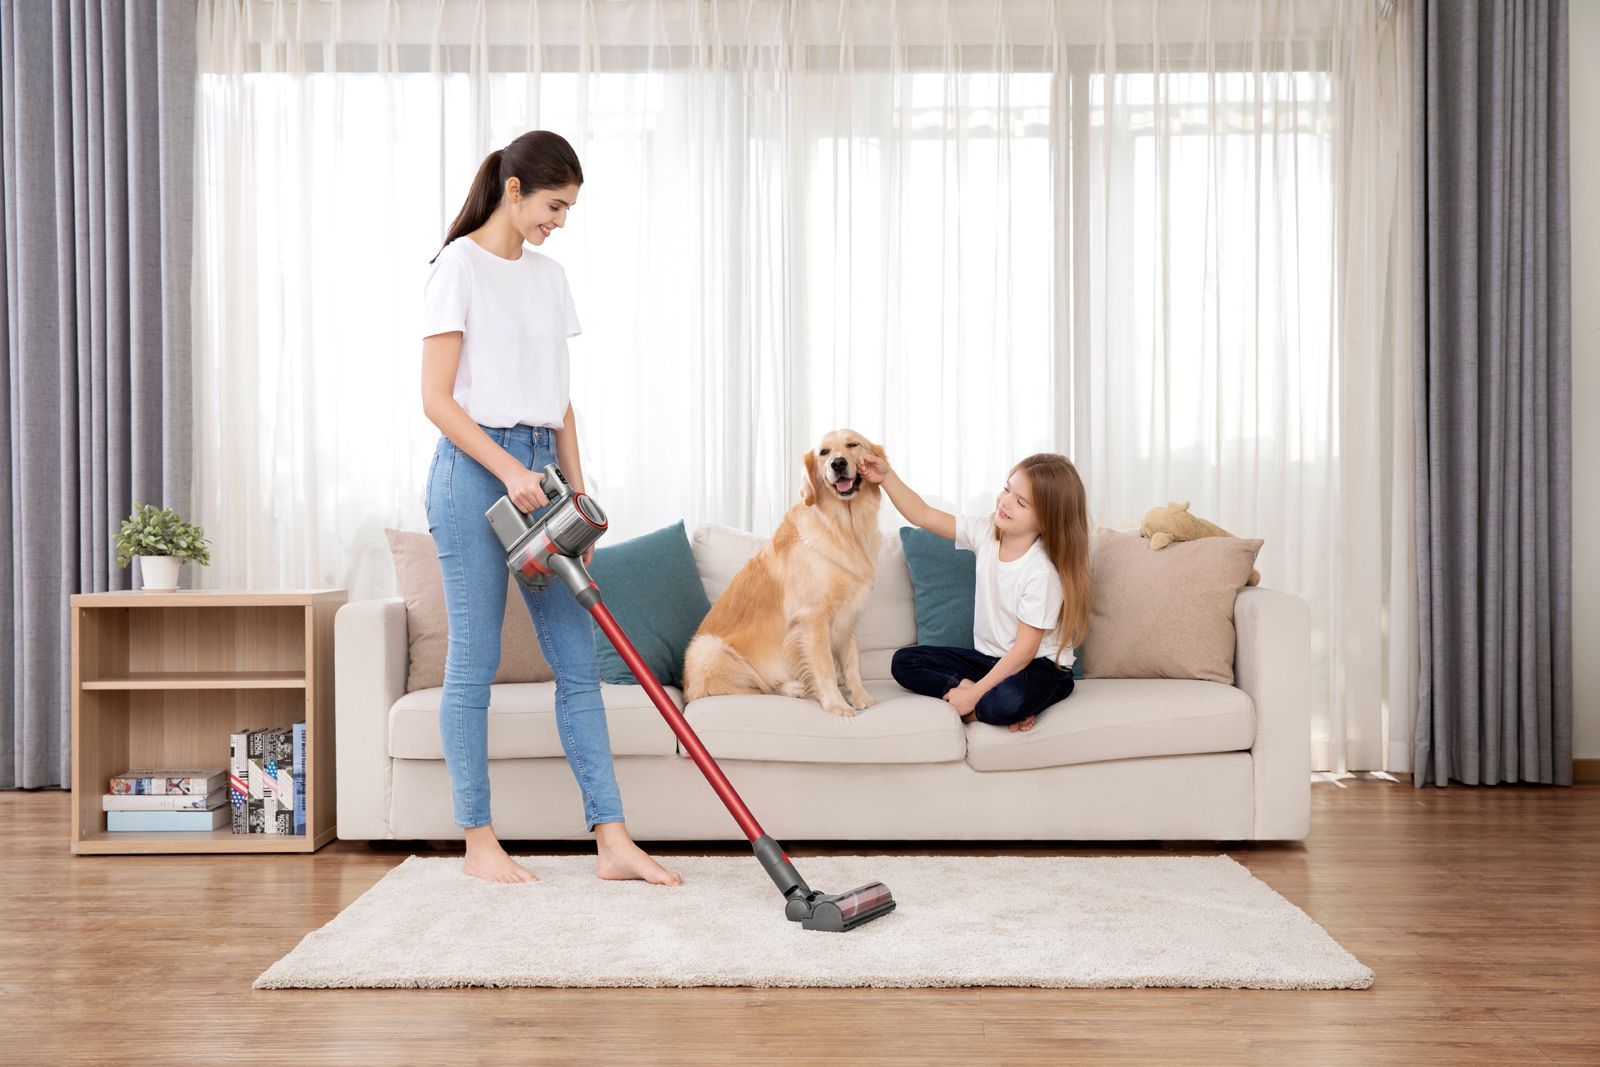 2020 Vacuum Cleaners buyers guide – These are the most important things to consider when buying a vacuum photo 2